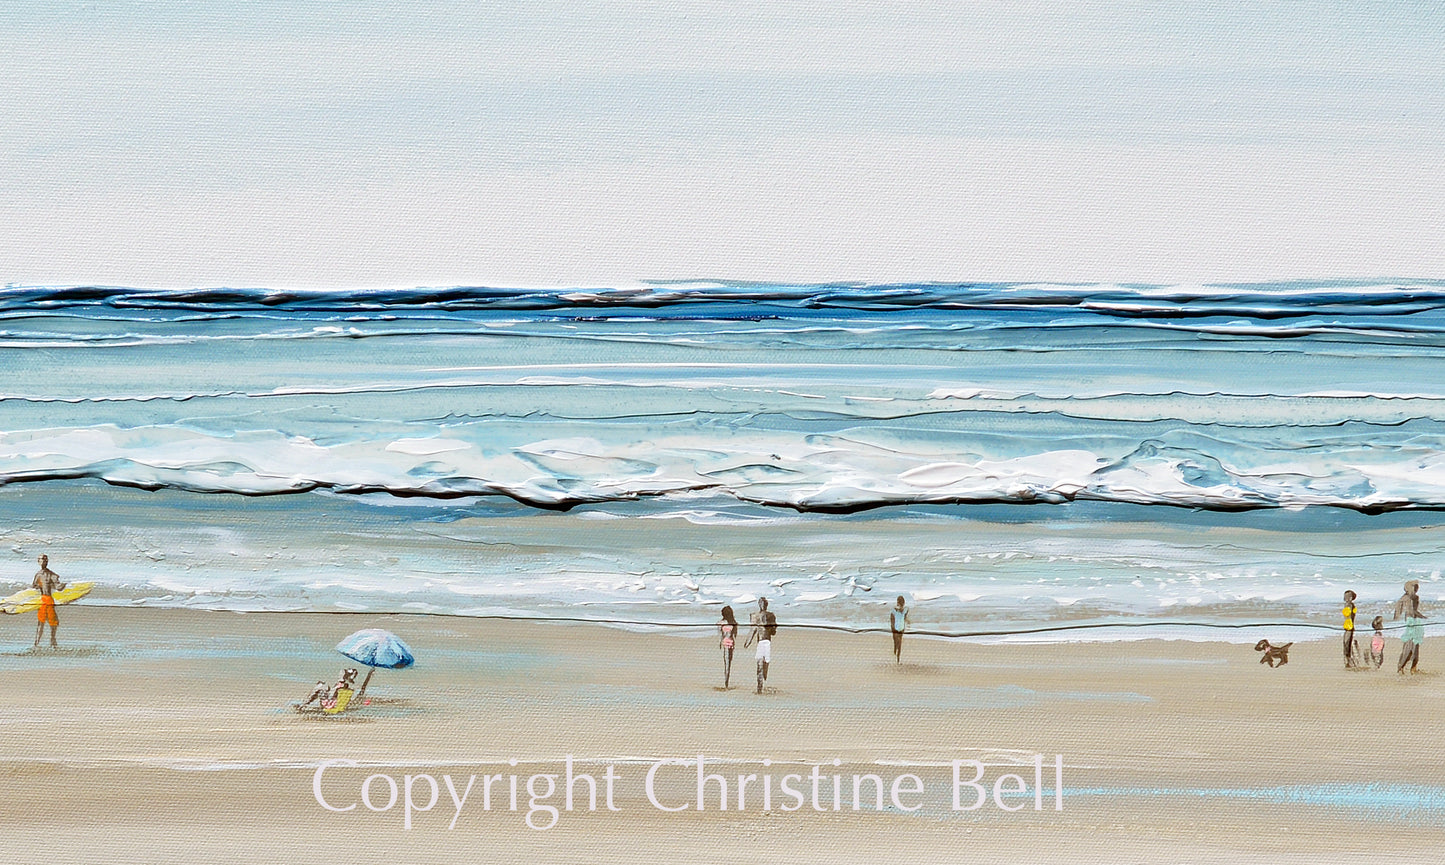 "Beach Day" SPECIAL RELEASE GICLEE PRINT Art Coastal Abstract Painting Textured Ocean Waves Figurative Beach Goers Blue White